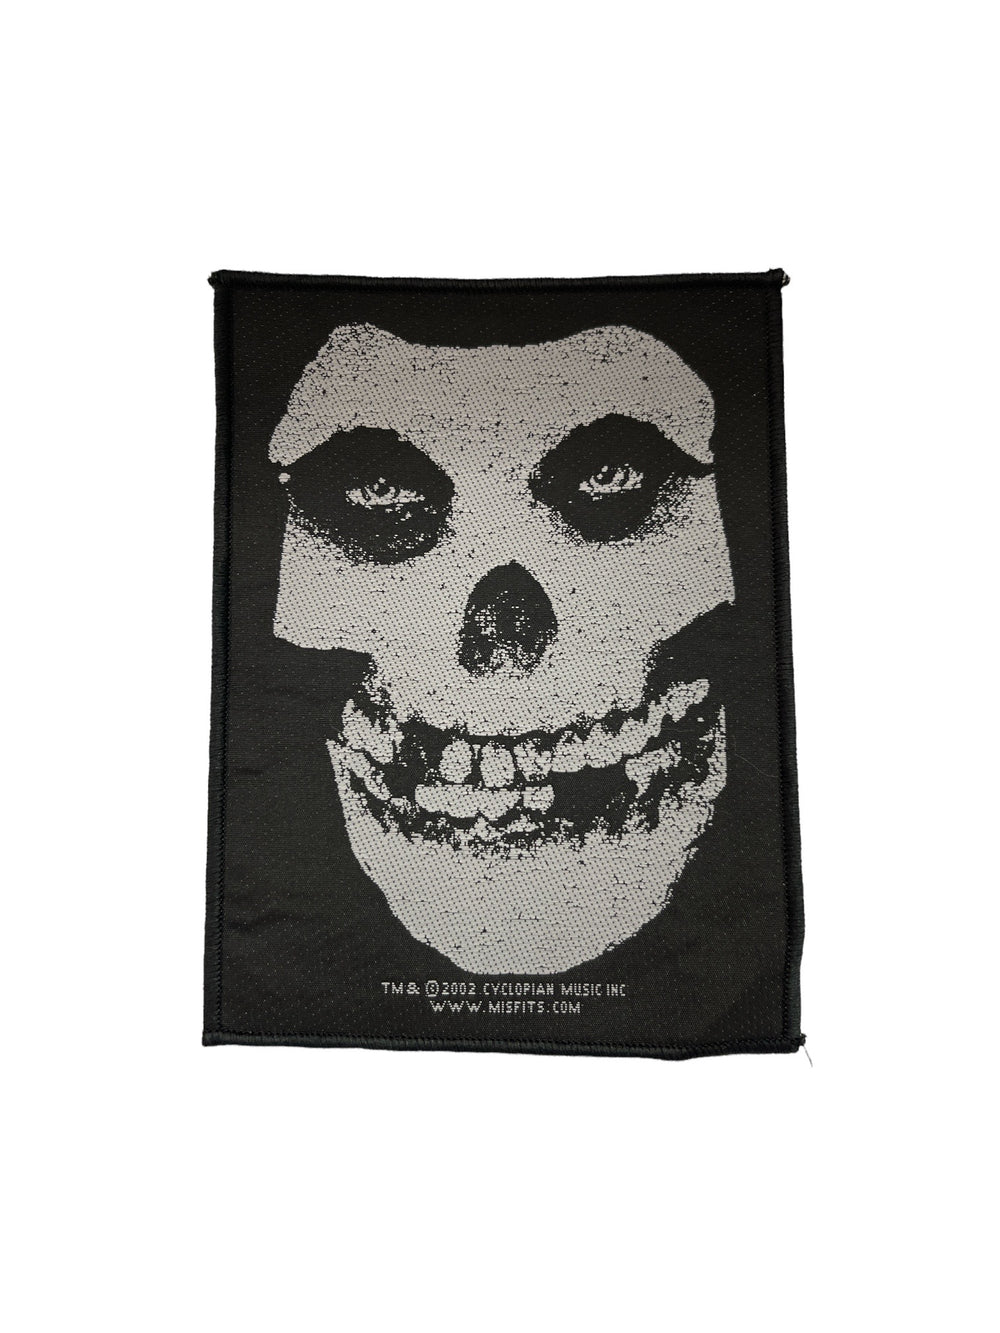 Misfits The White Skull Official Woven Patch Brand New